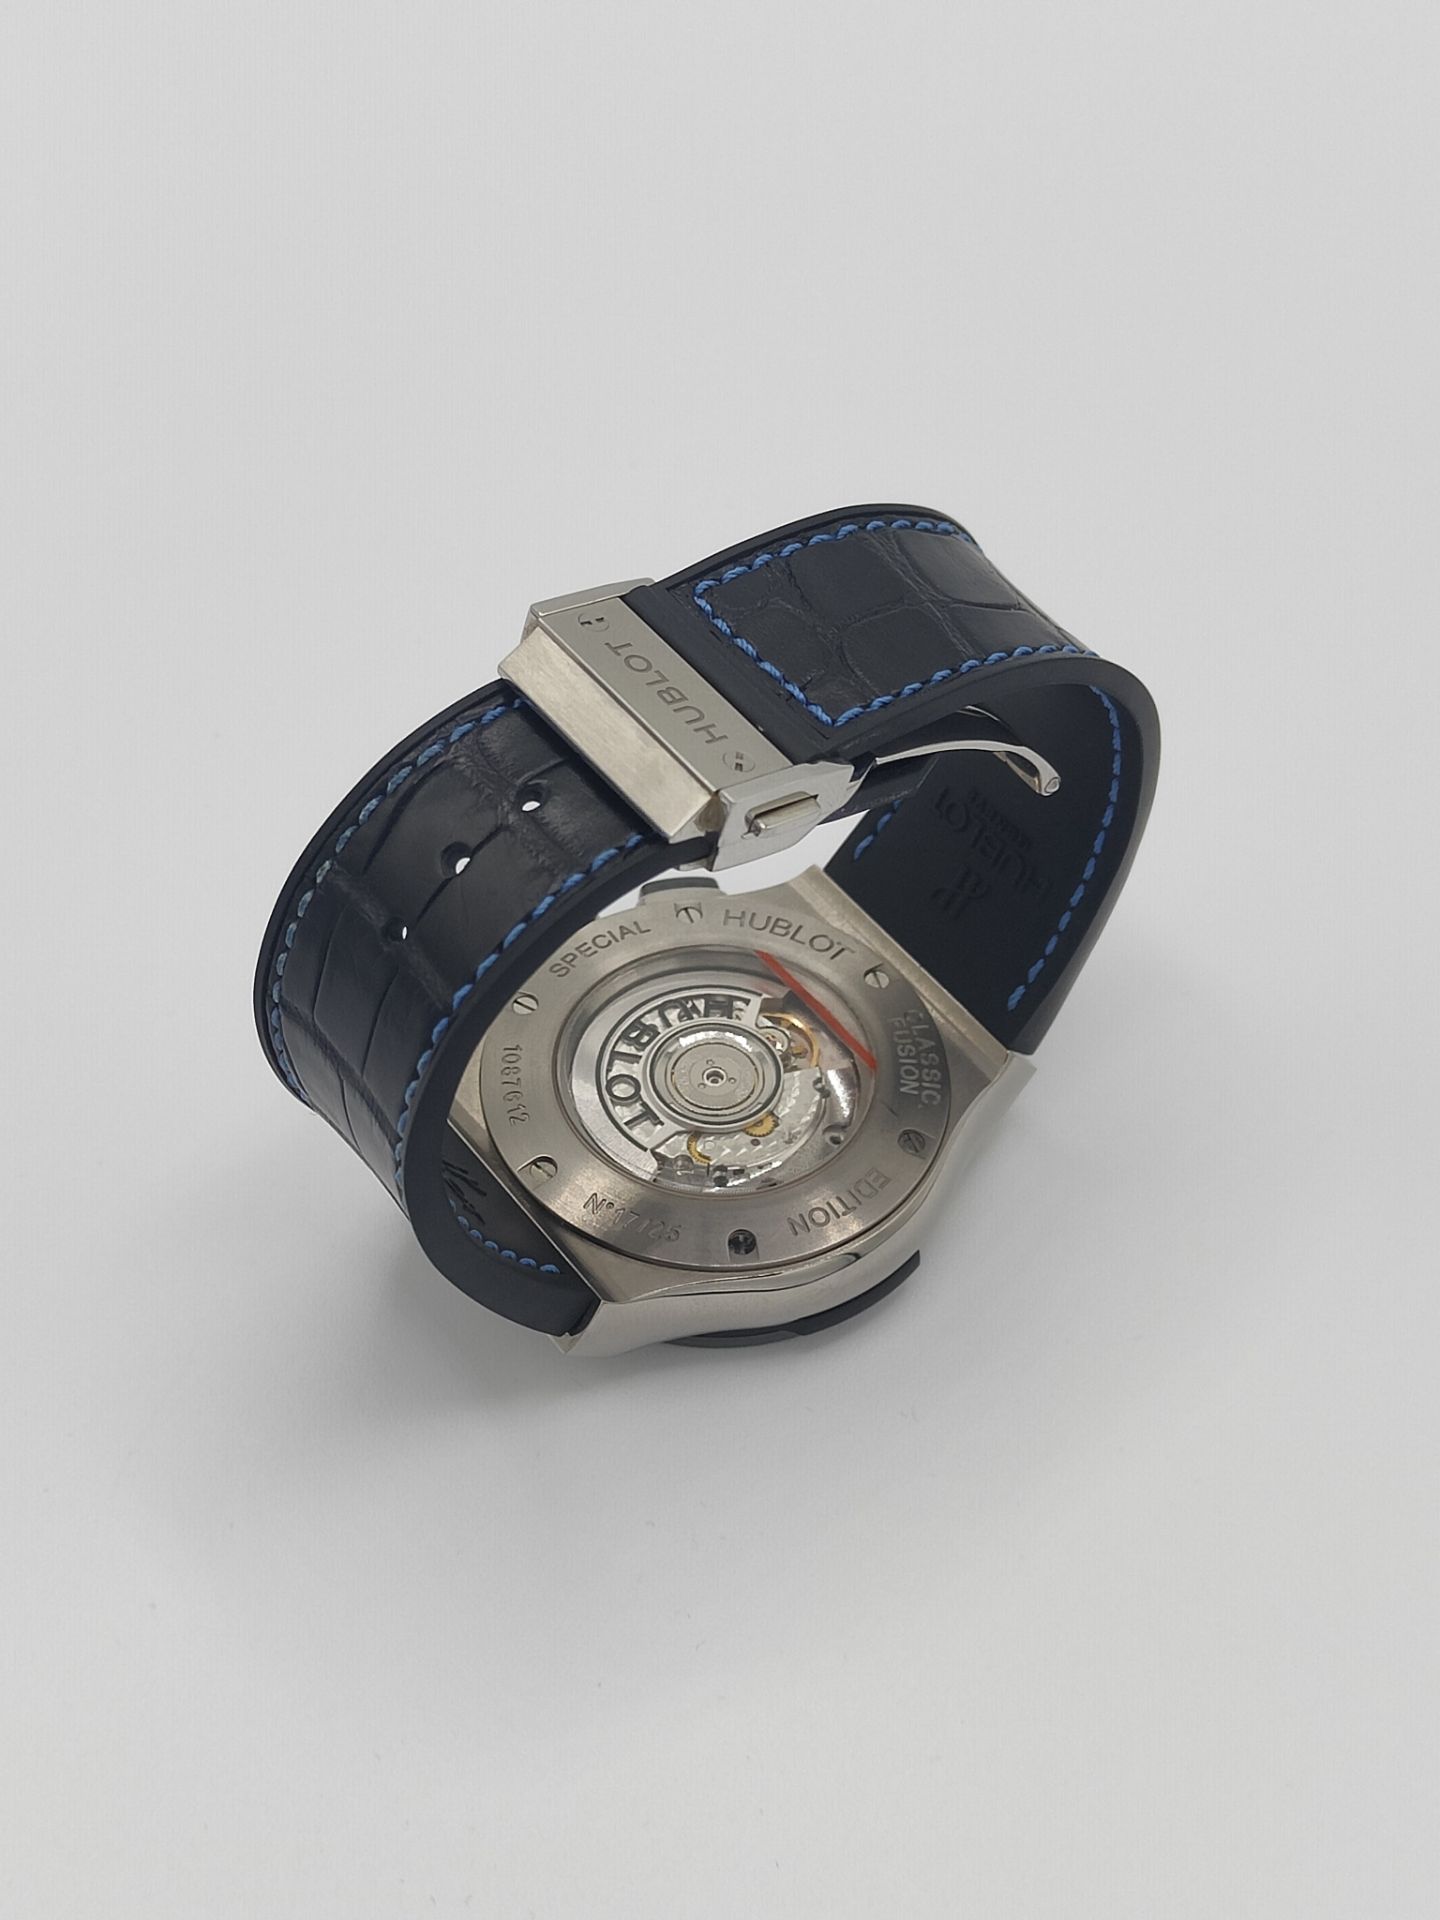 Hublot Classic Fusion Special Edition Watch - Image 7 of 11